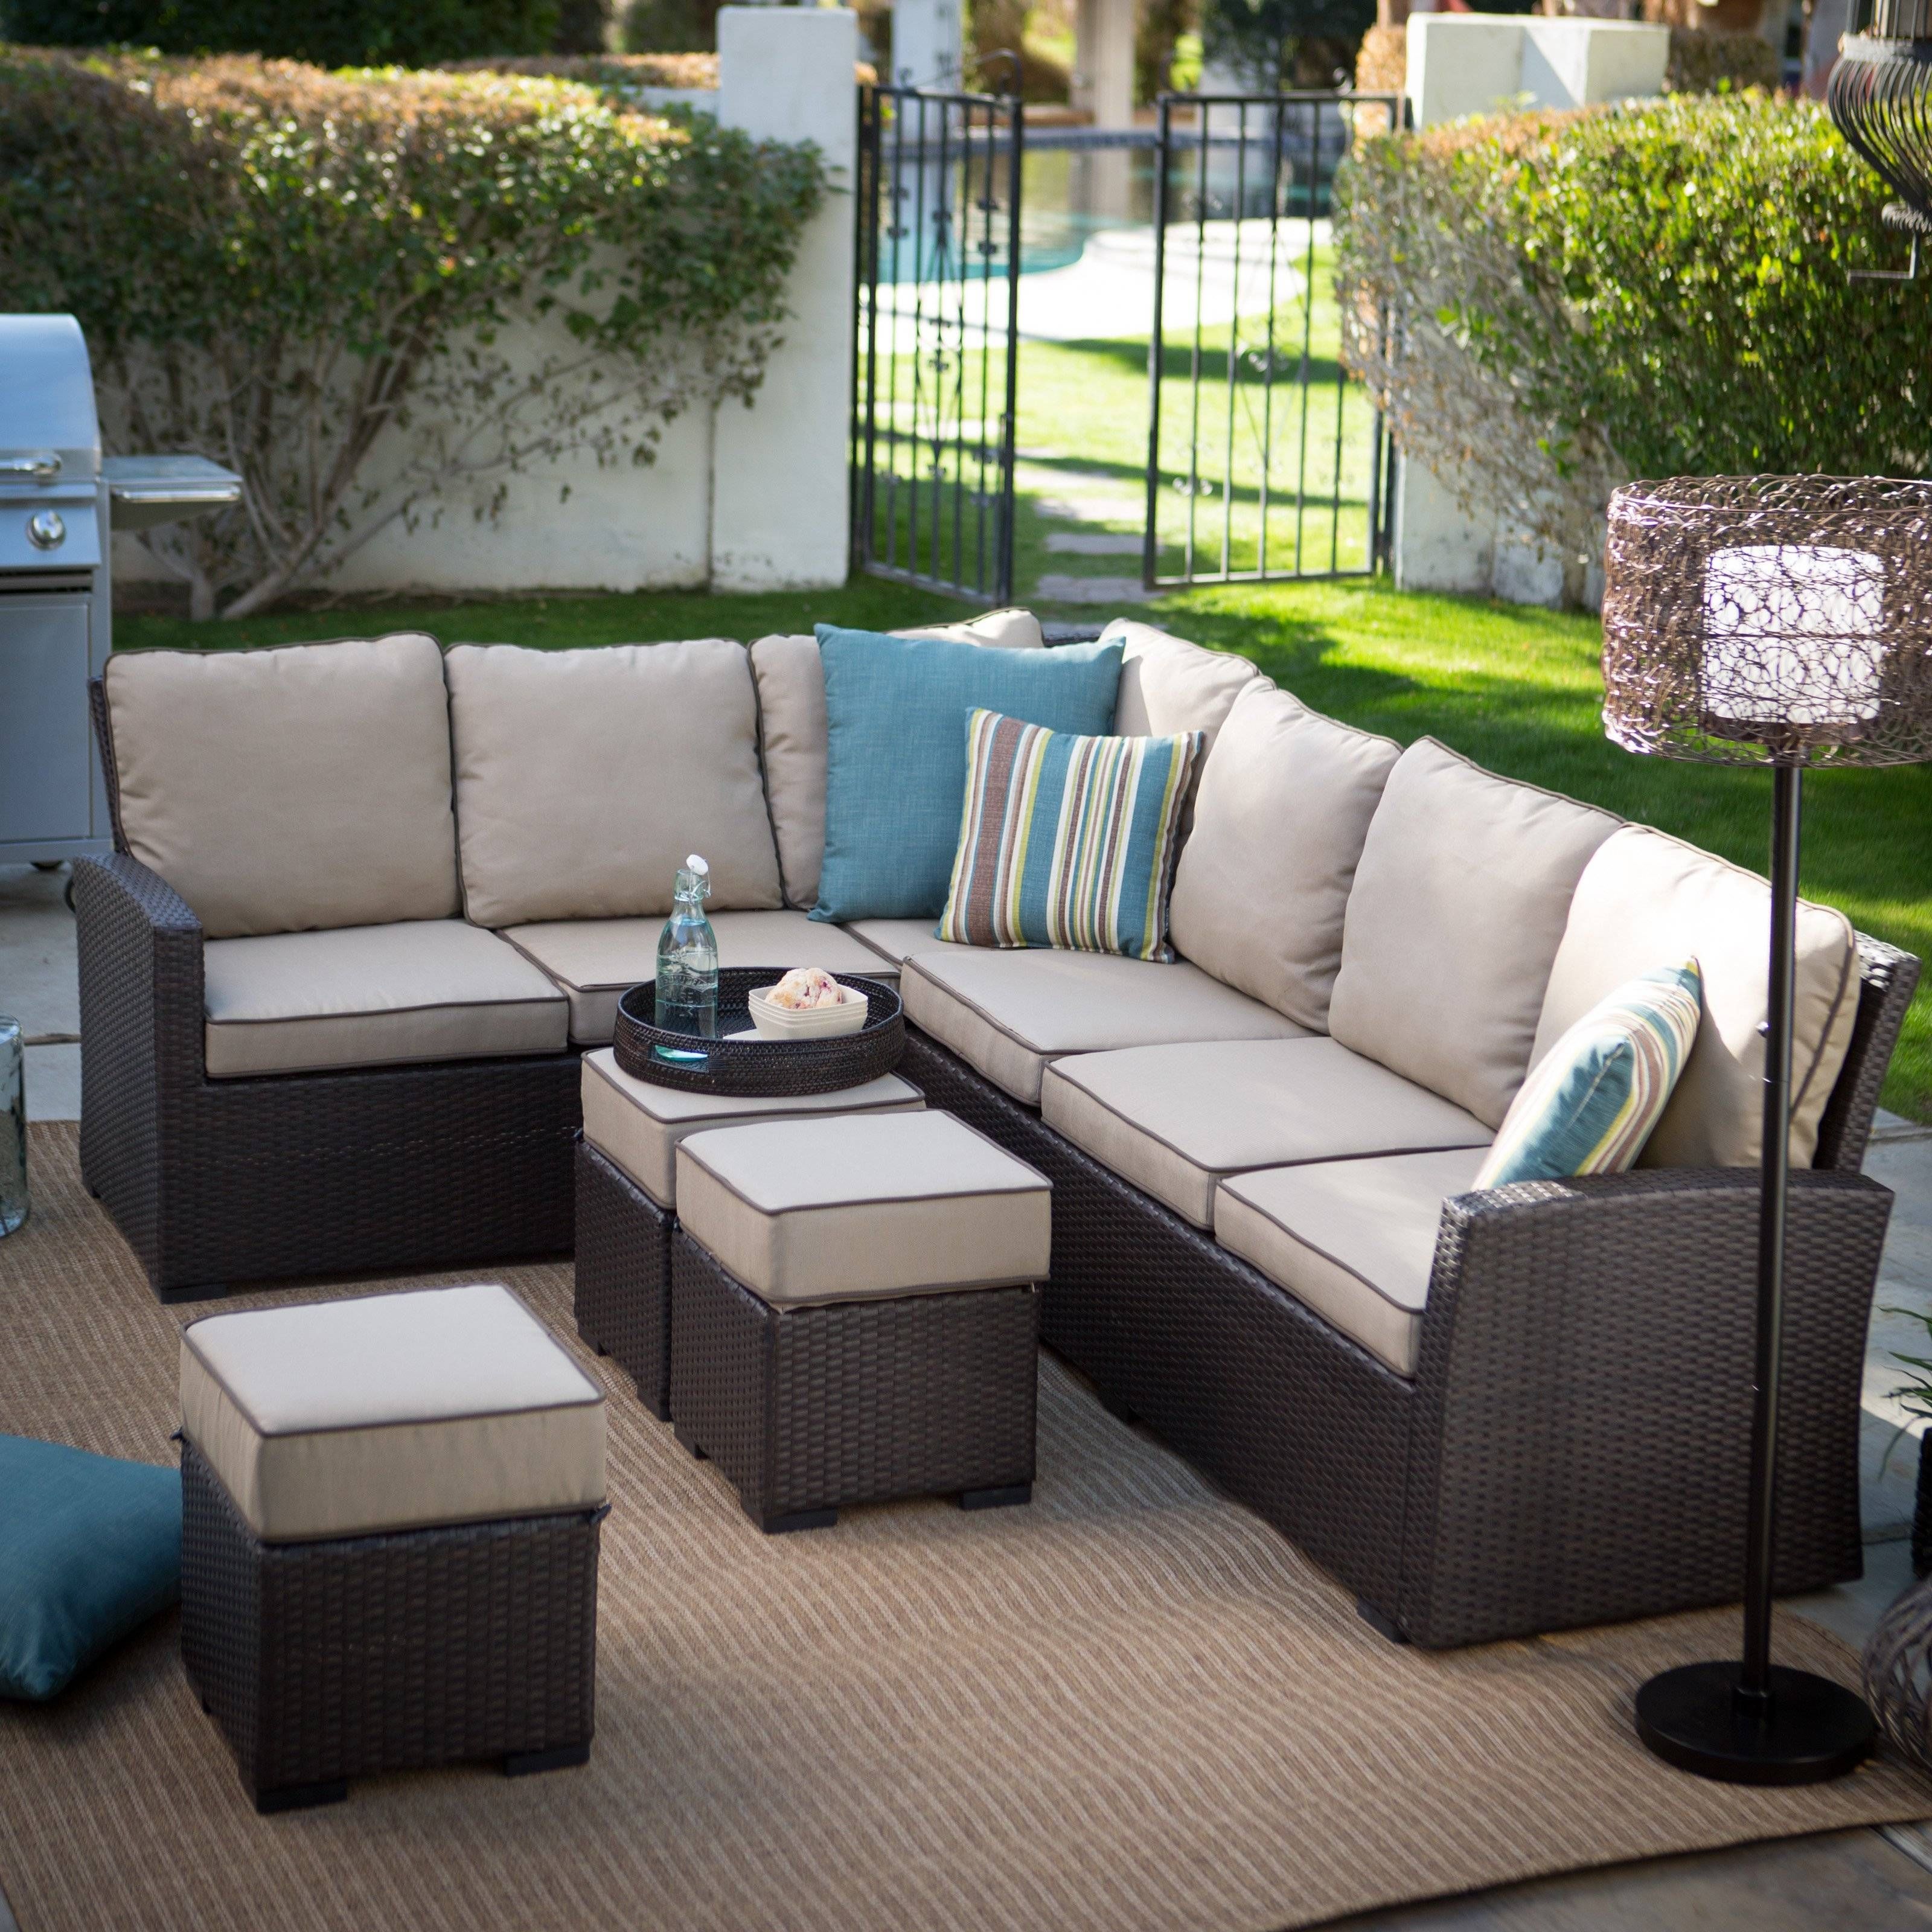 Belham Living Monticello All Weather Outdoor Wicker Sofa Sectional Regarding Cheap Patio Sofas (View 20 of 30)